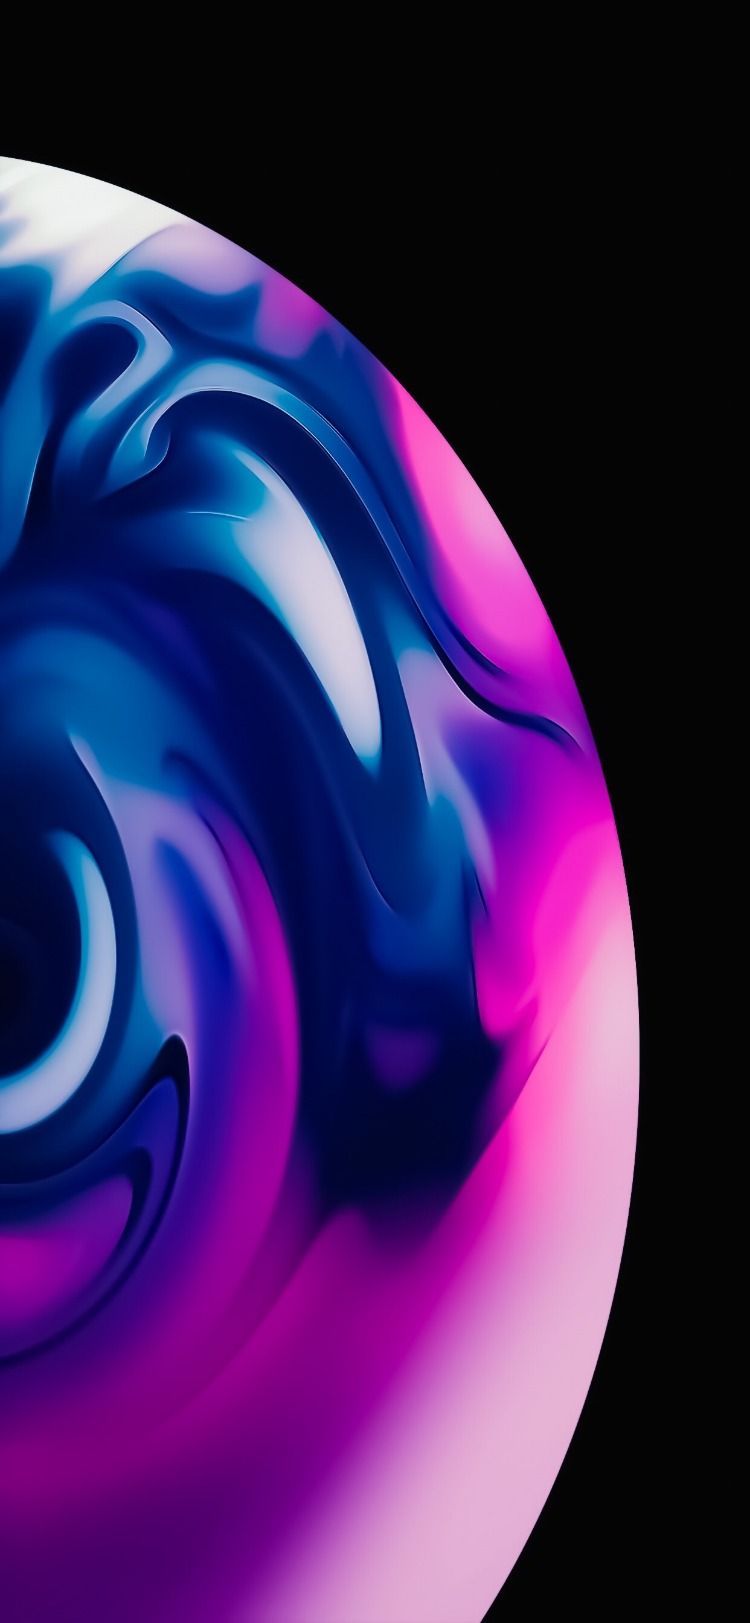 Free download Abstract Wallpaper Download for iPhone Android